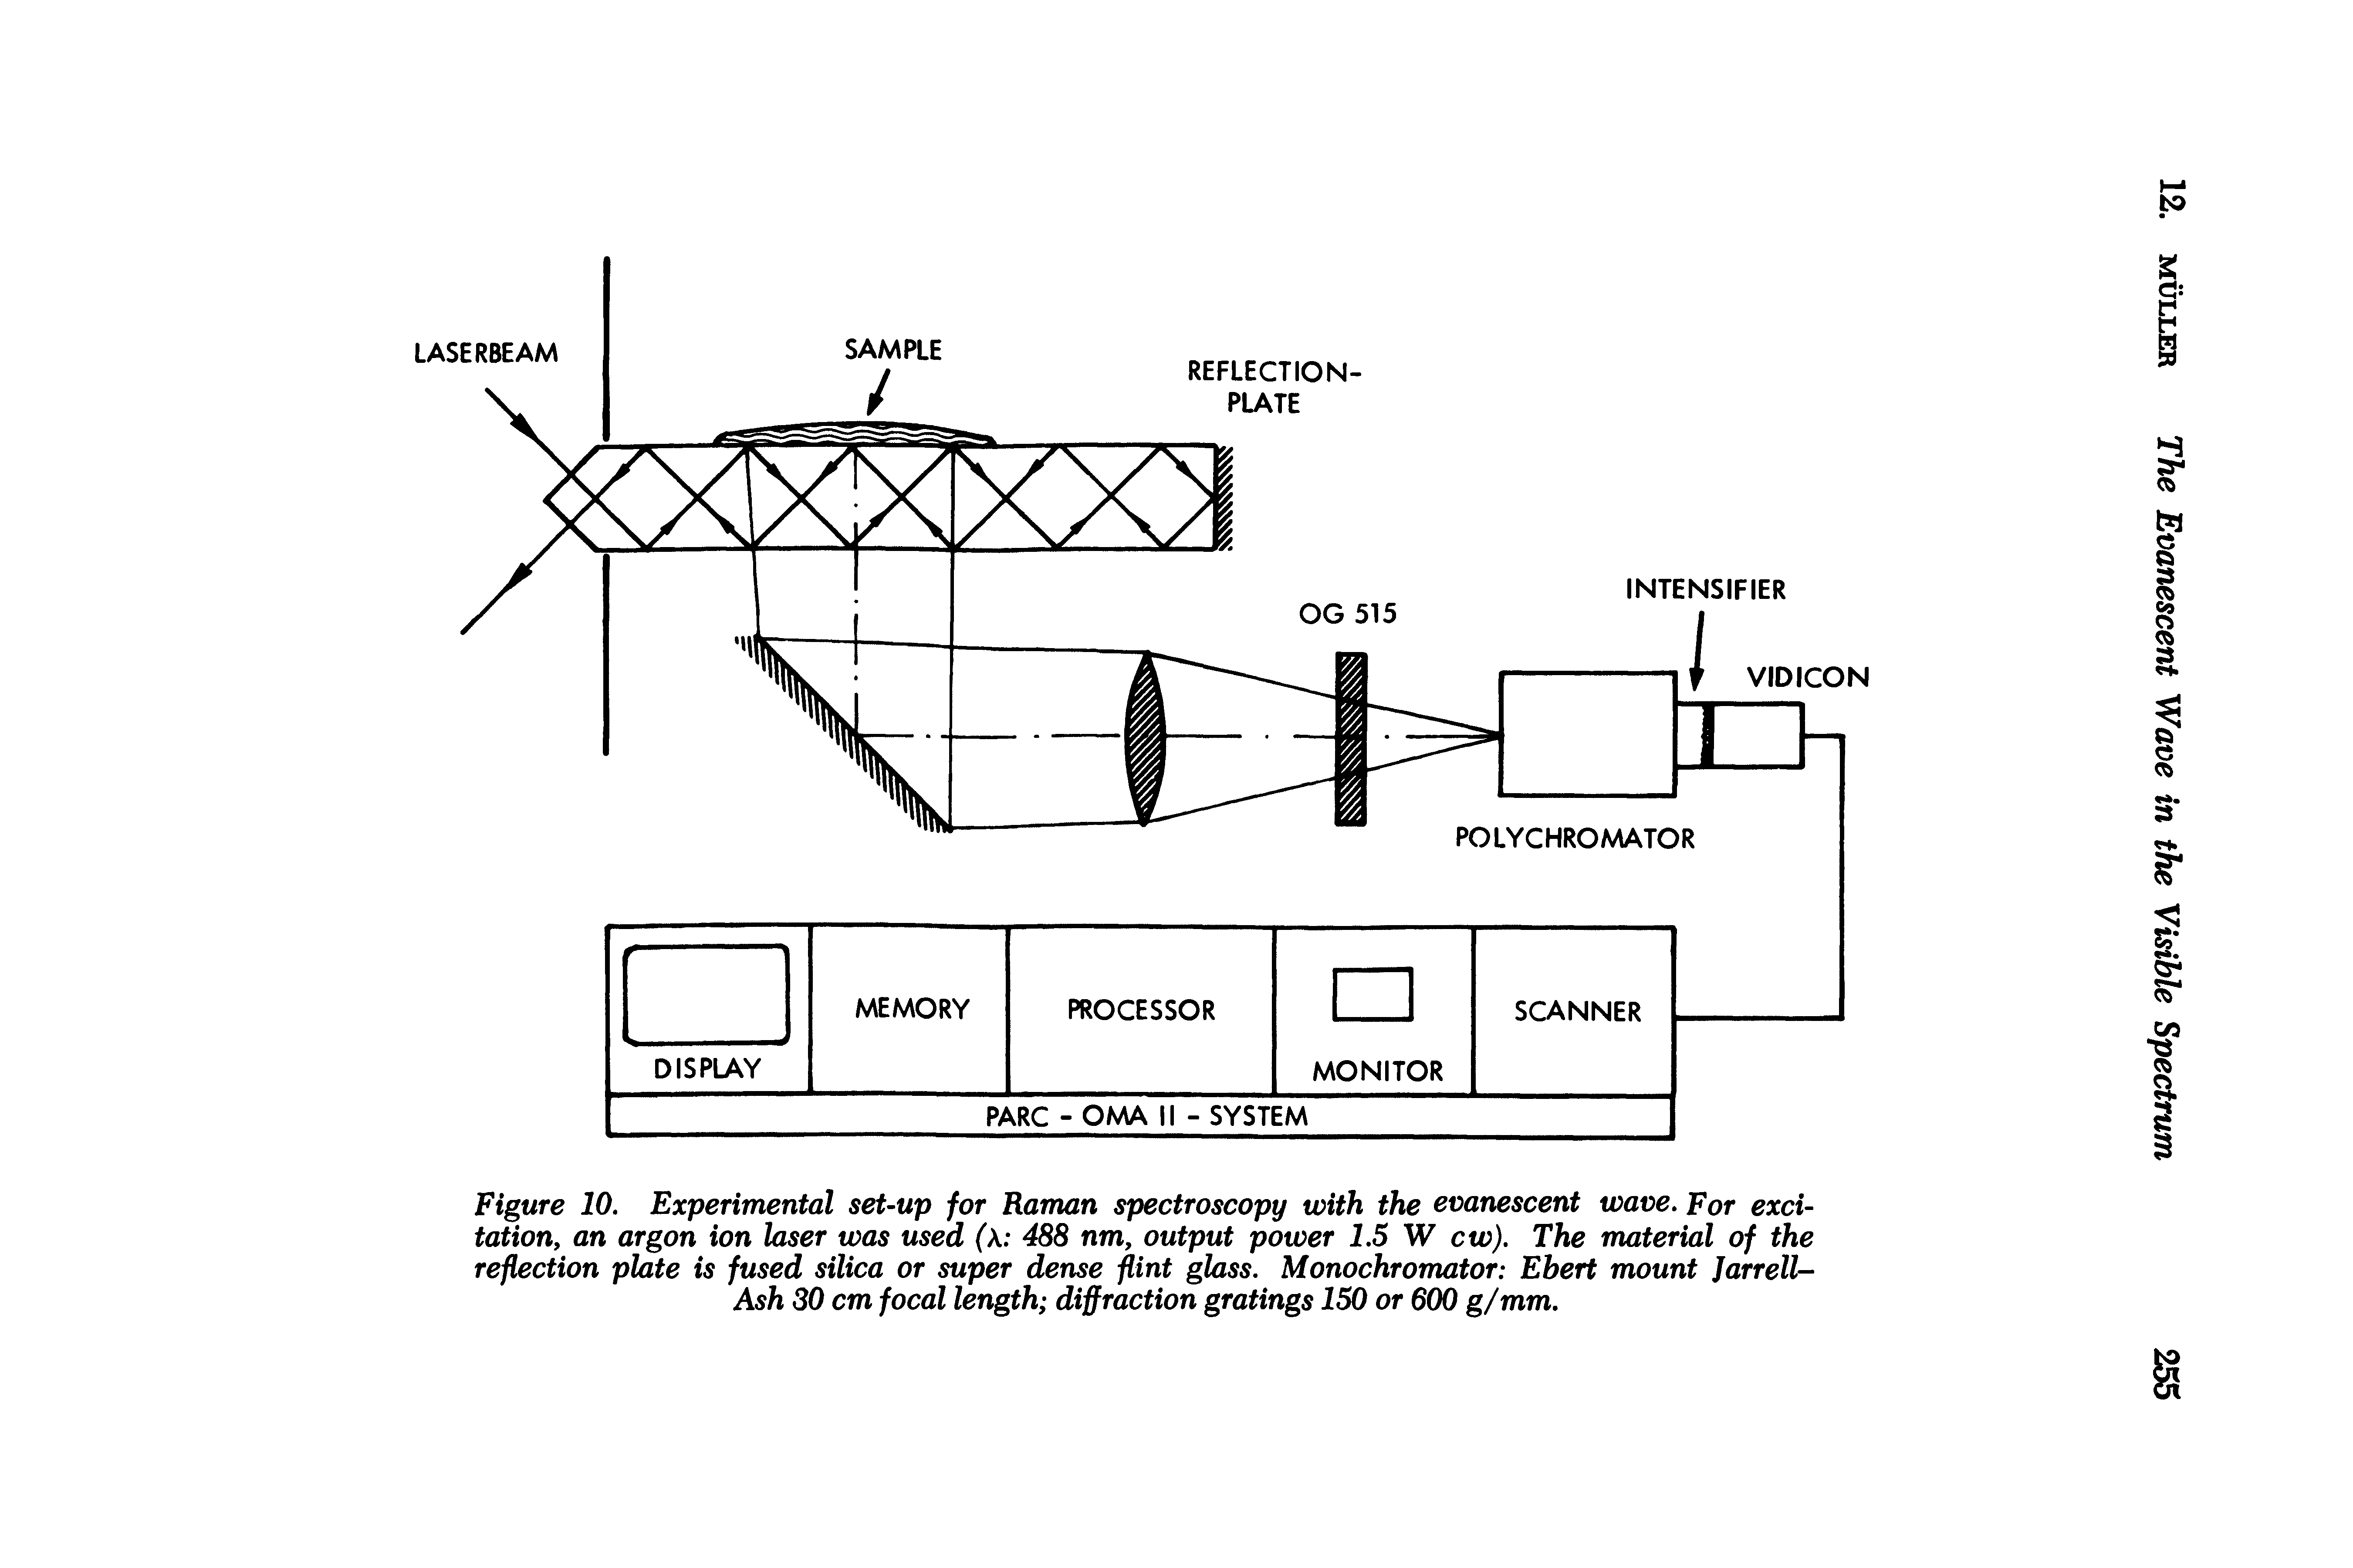 Figure 10. Experimental set-up for Raman spectroscopy with the evanescent wave. For excitation, an argon ion laser was used ( 488 nm, output power 1.5 W cw). The material of the reflection plate is fused silica or super dense flint glass. Monochromator Ebert mount Jarrell-Ash 30 cm focal length diffraction gratings 150 or 600 g/mm.